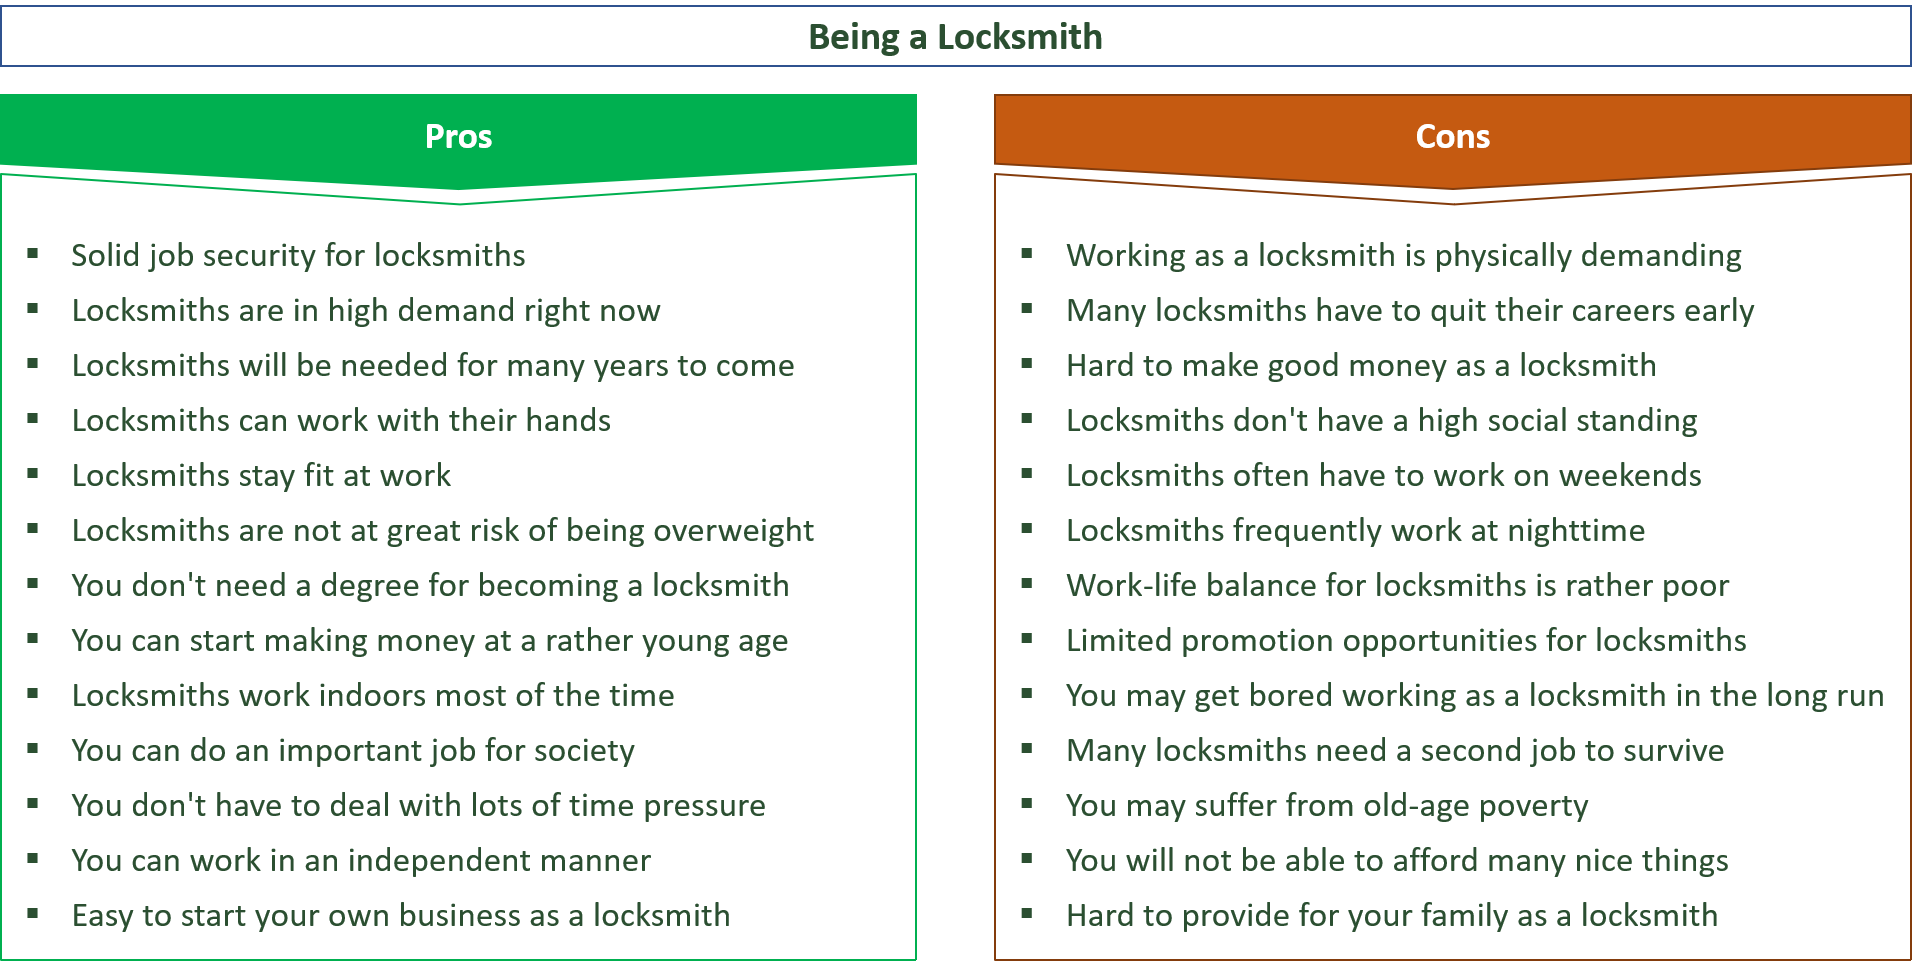 advantages and disadvantages of being a locksmith